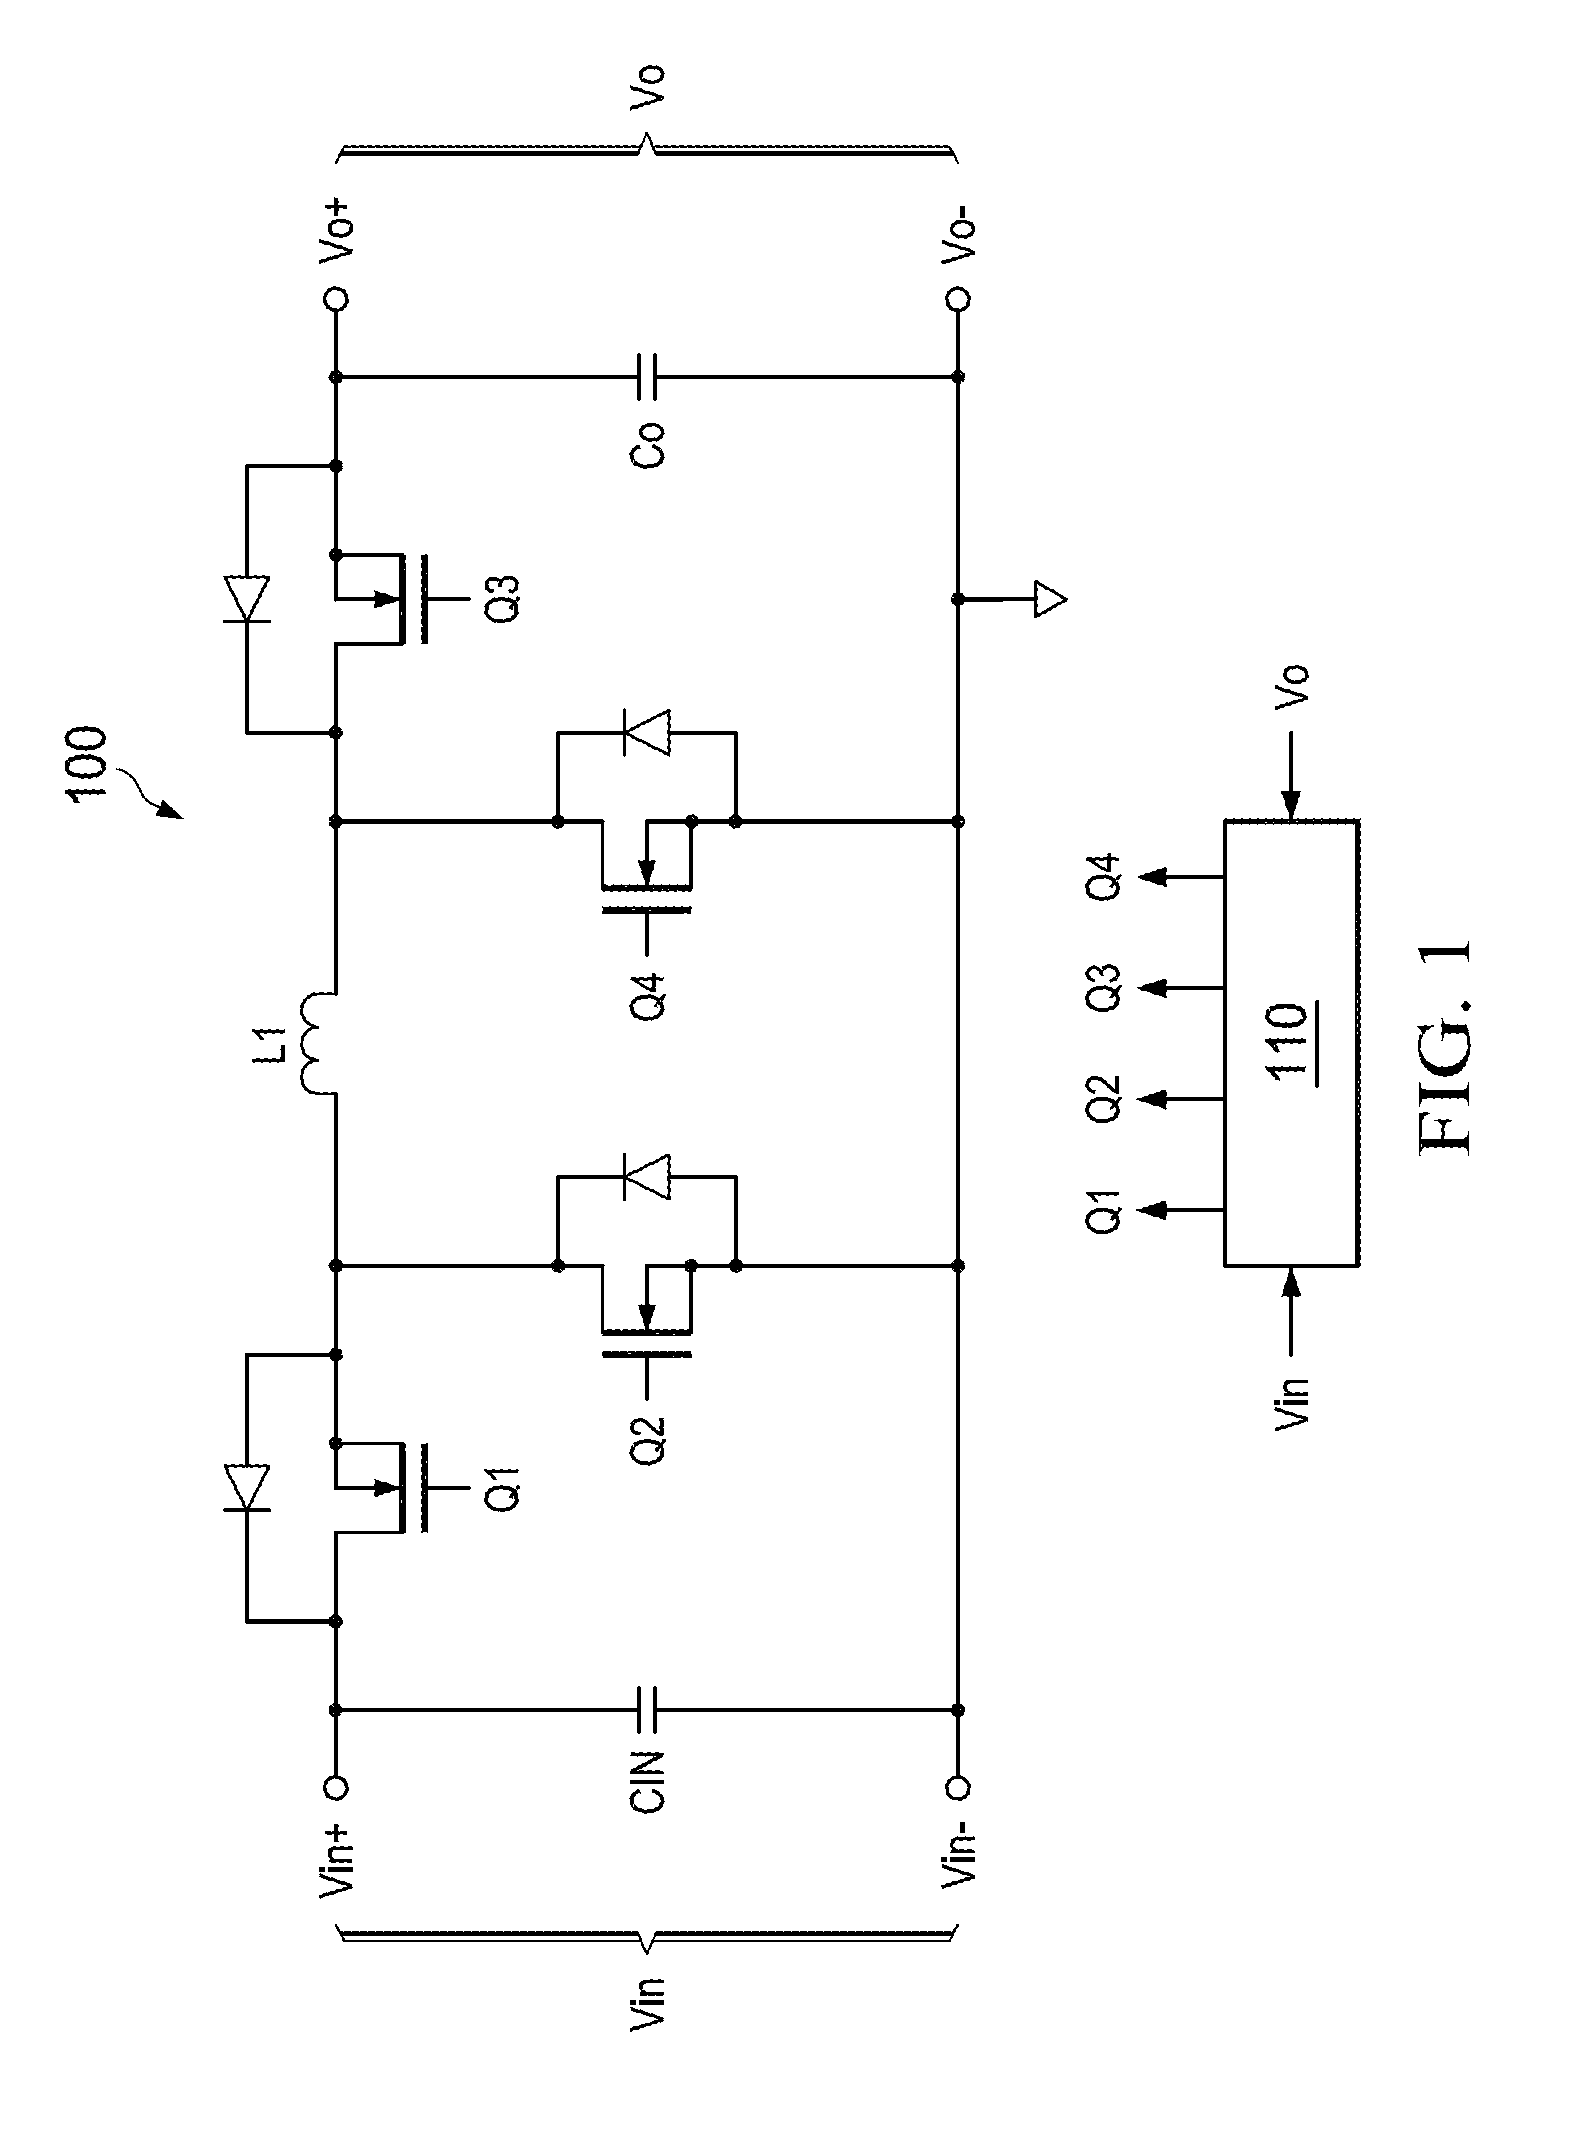 Control Method for Buck-Boost Power Converters